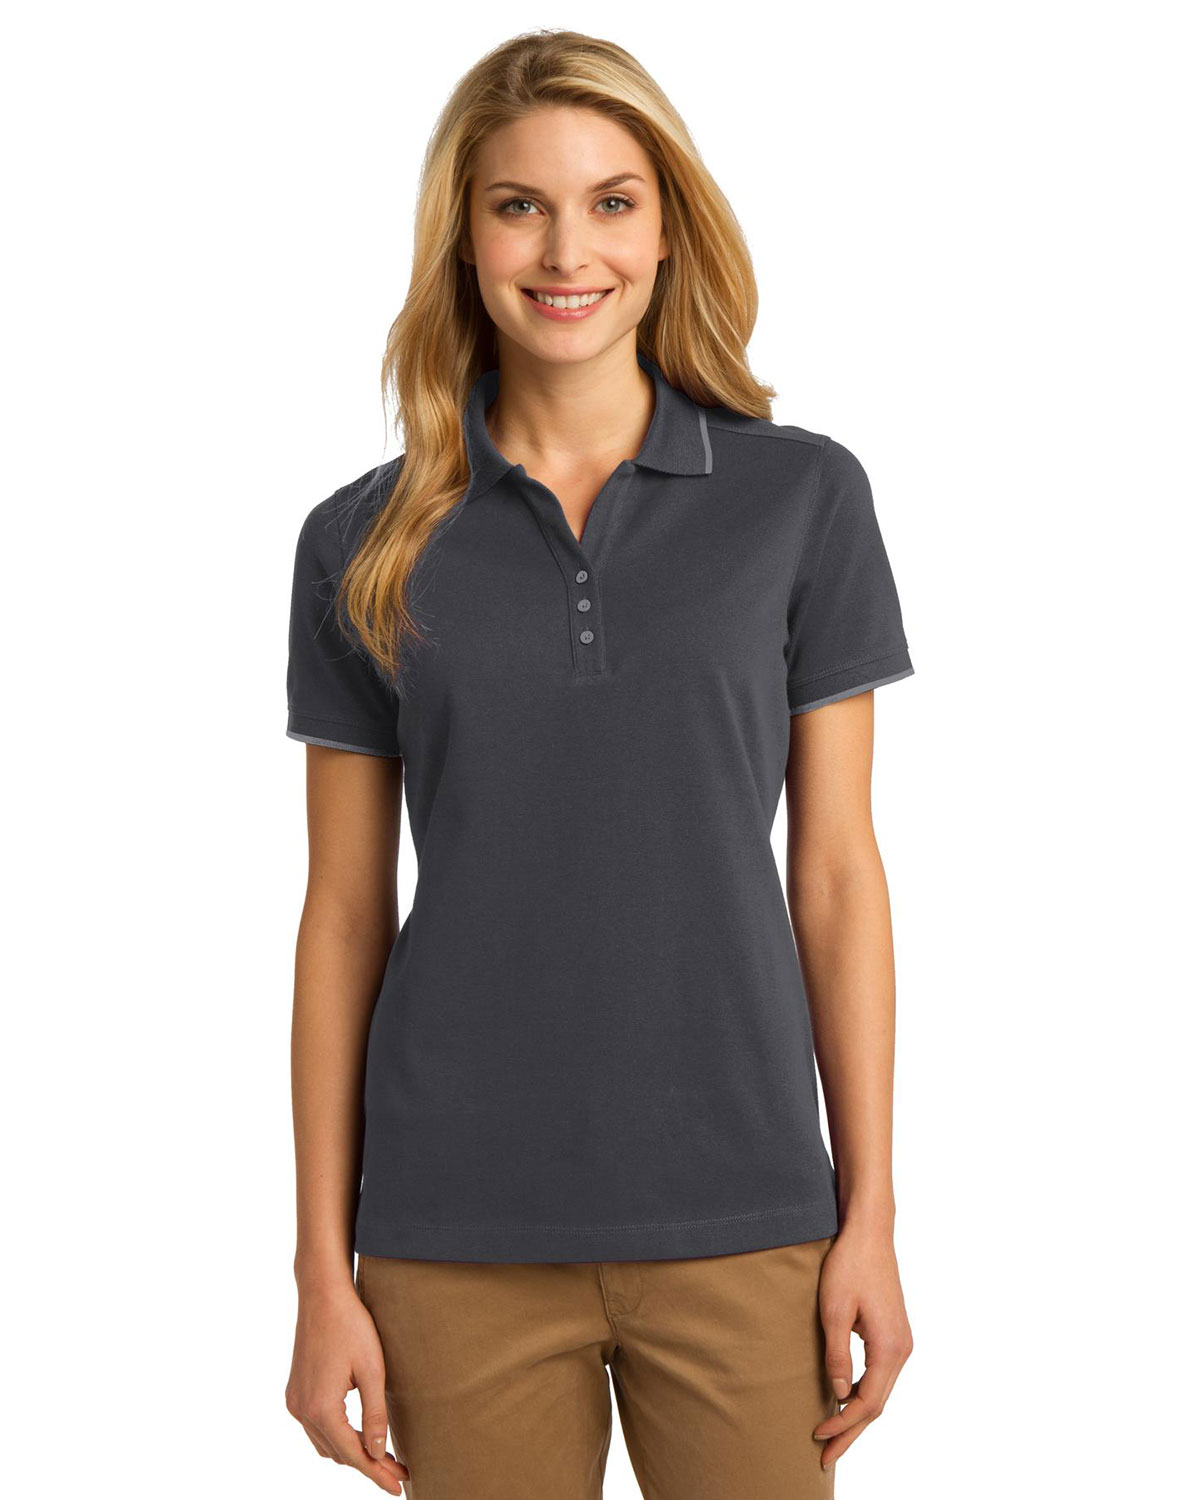 Port Authority L454 Women Rapid Dry Tipped Polo at Apparelstation